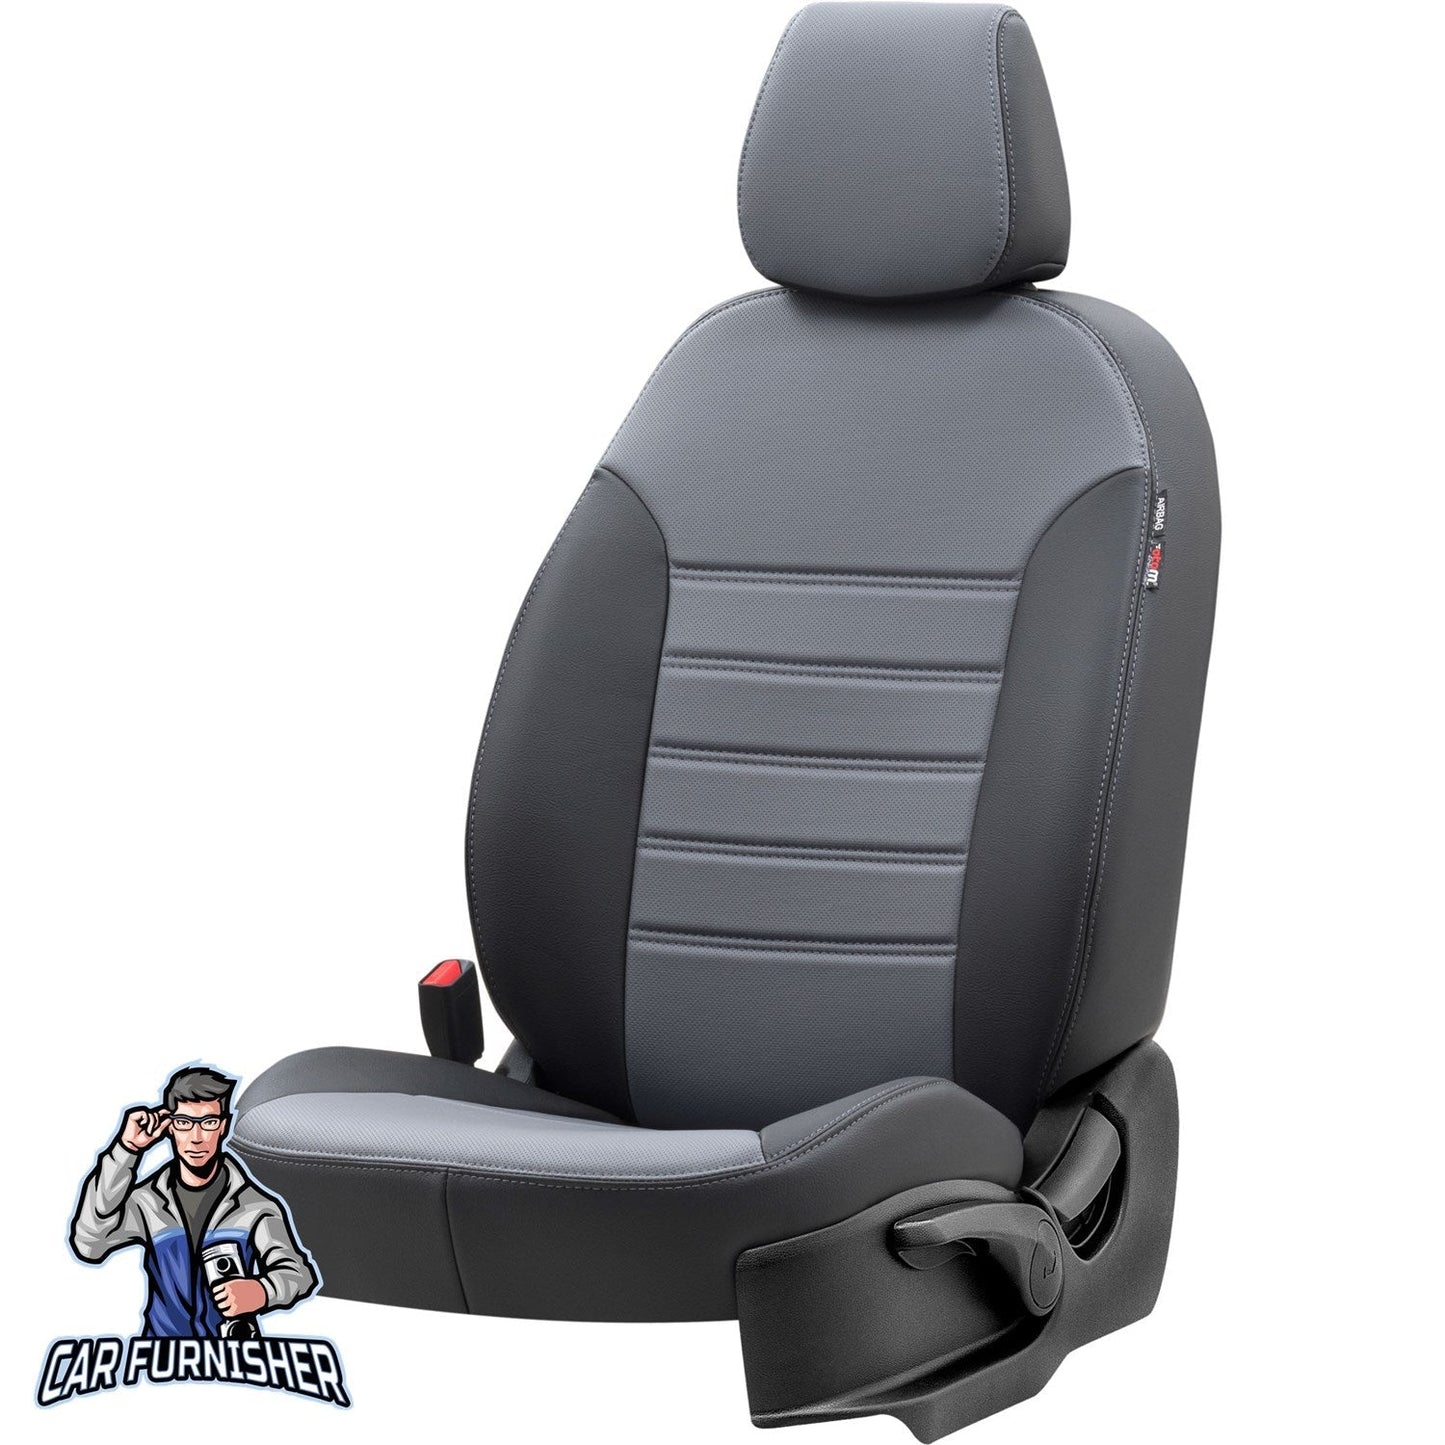 Hyundai Starex Seat Covers Istanbul Leather Design Smoked Black Leather